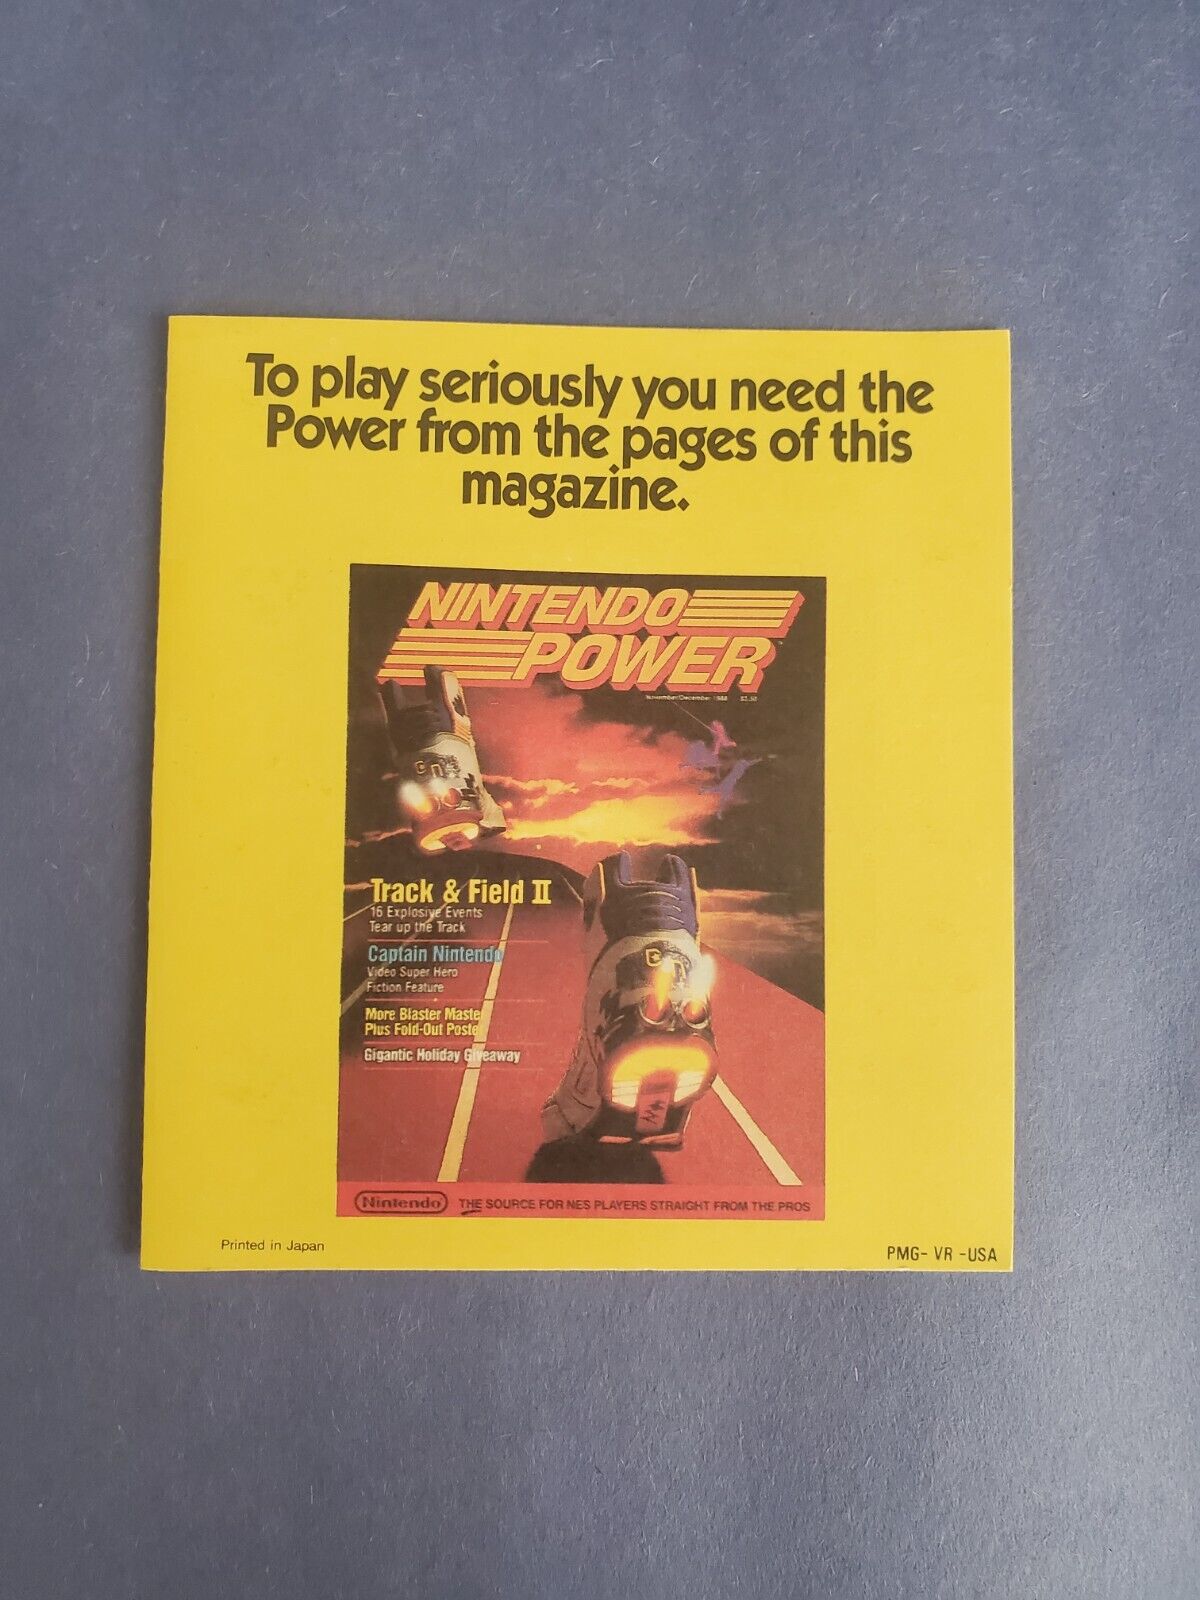 Subscription PMG-VR-USA Nintendo Power Card ONLY